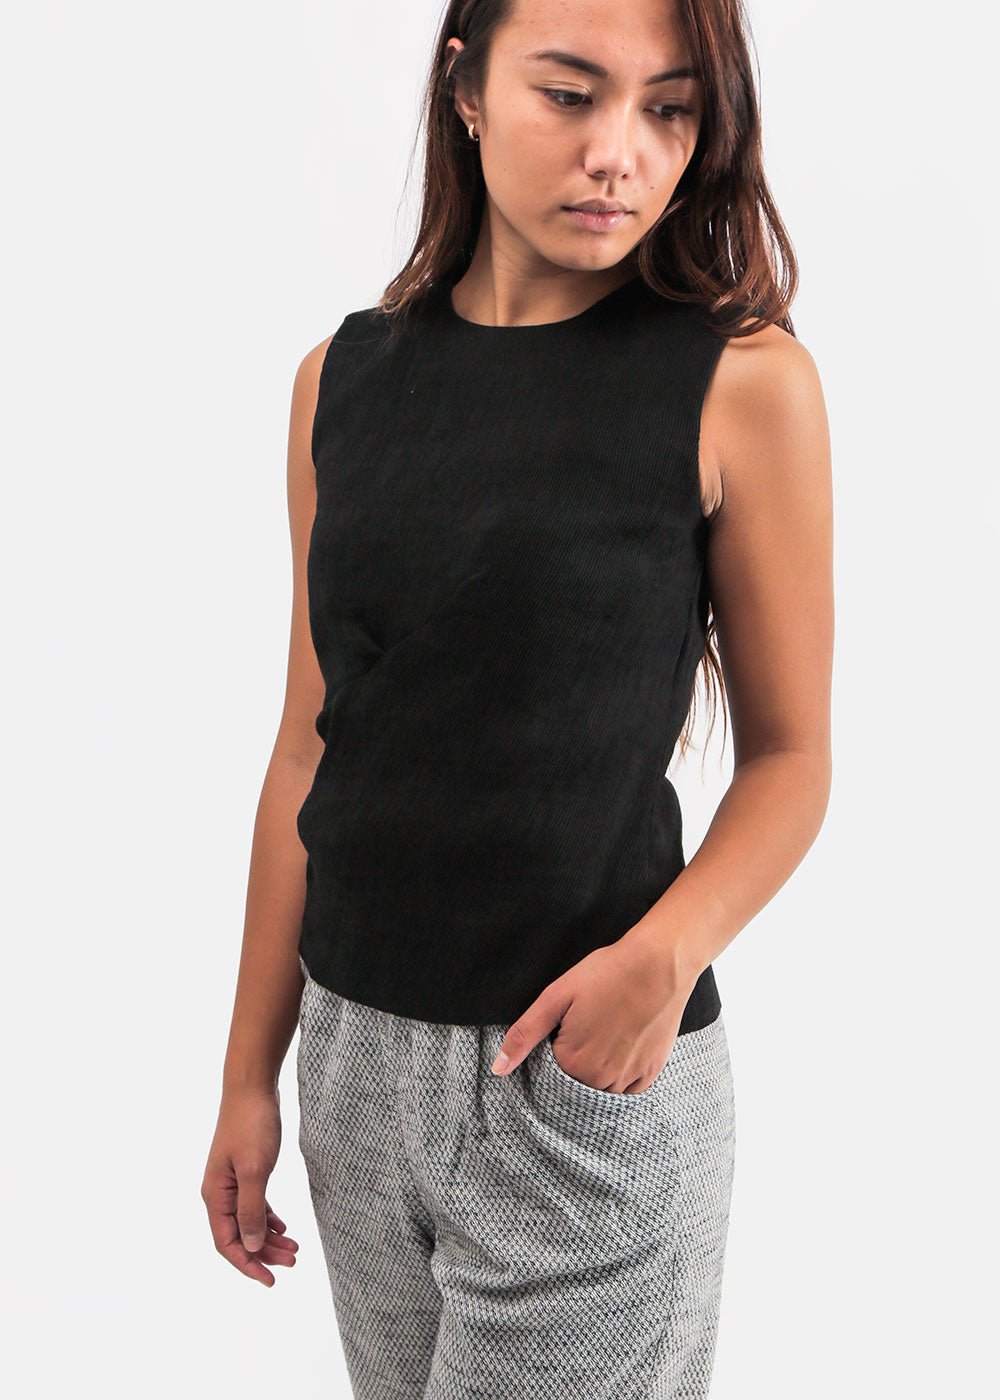 Ajaie Alaie Ink Siempre Lunes Top — Shop sustainable fashion and slow fashion at New Classics Studios